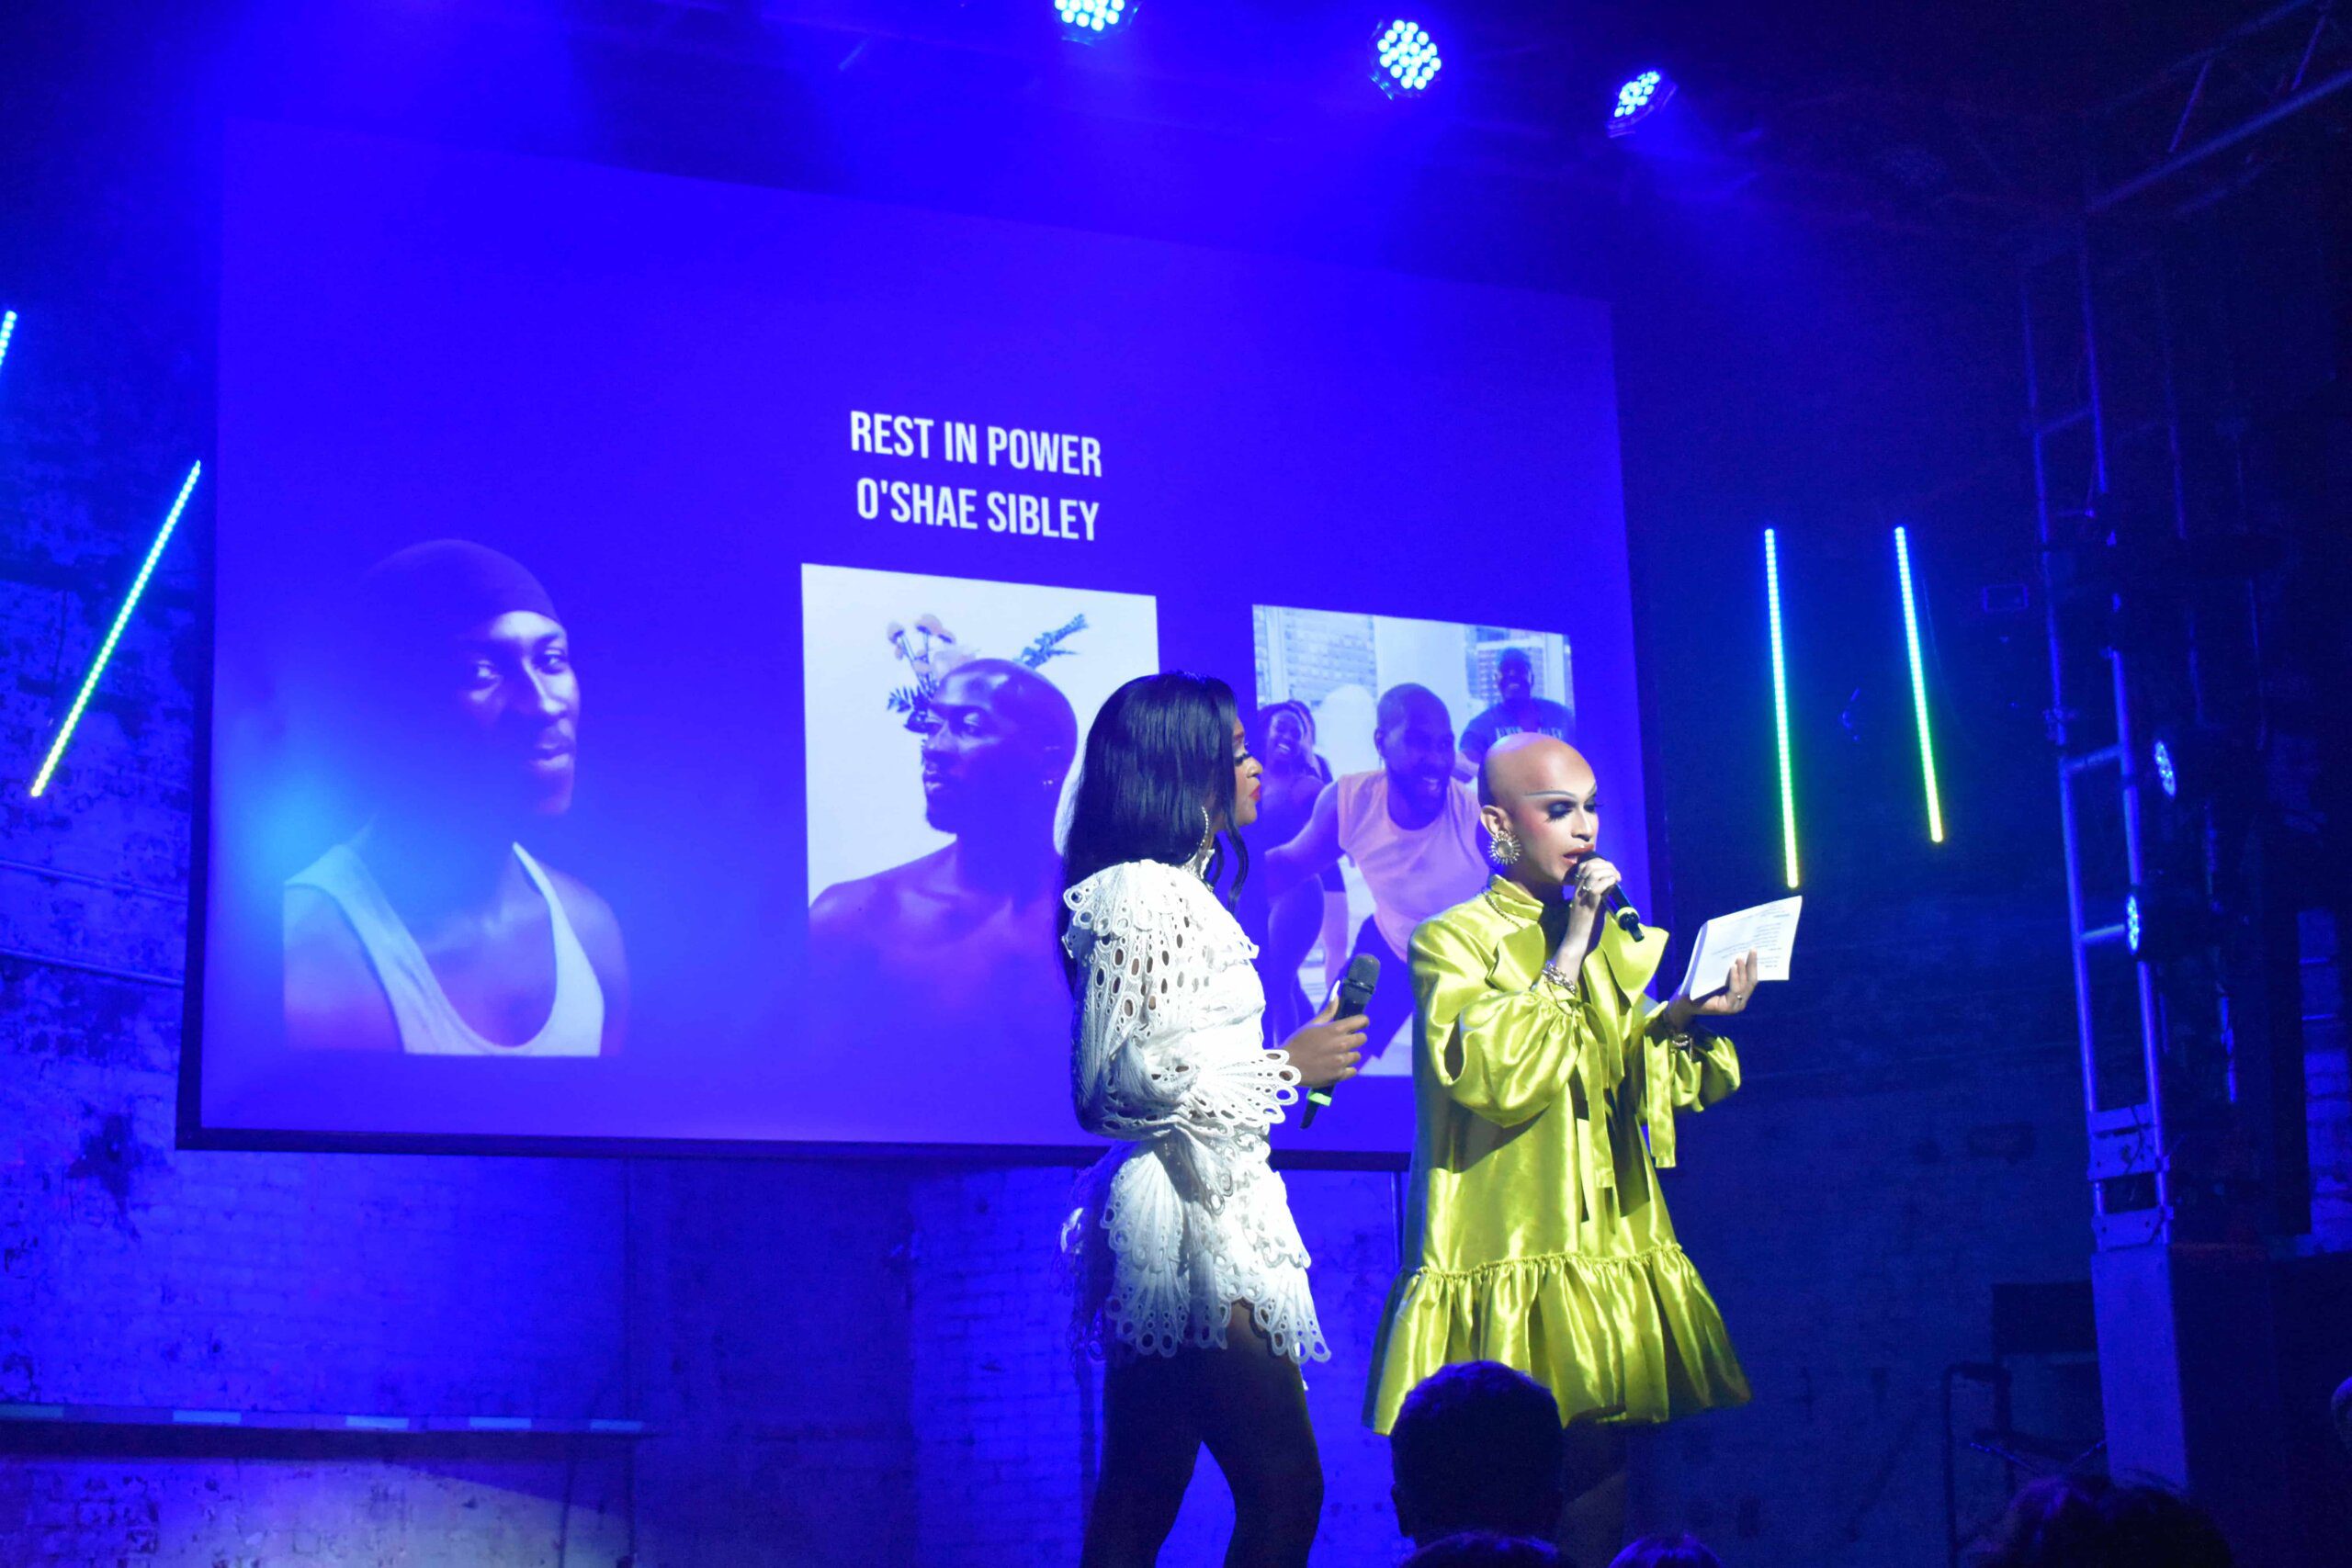 Two hosts, one in a greenish yellow dress and one in a white lace dress, hold microphones. The one in yellow reads from a folded paper. On a screen behind them are the words "REST IN POWER O'SHEA SIBLEY" and three photos of Sibley.